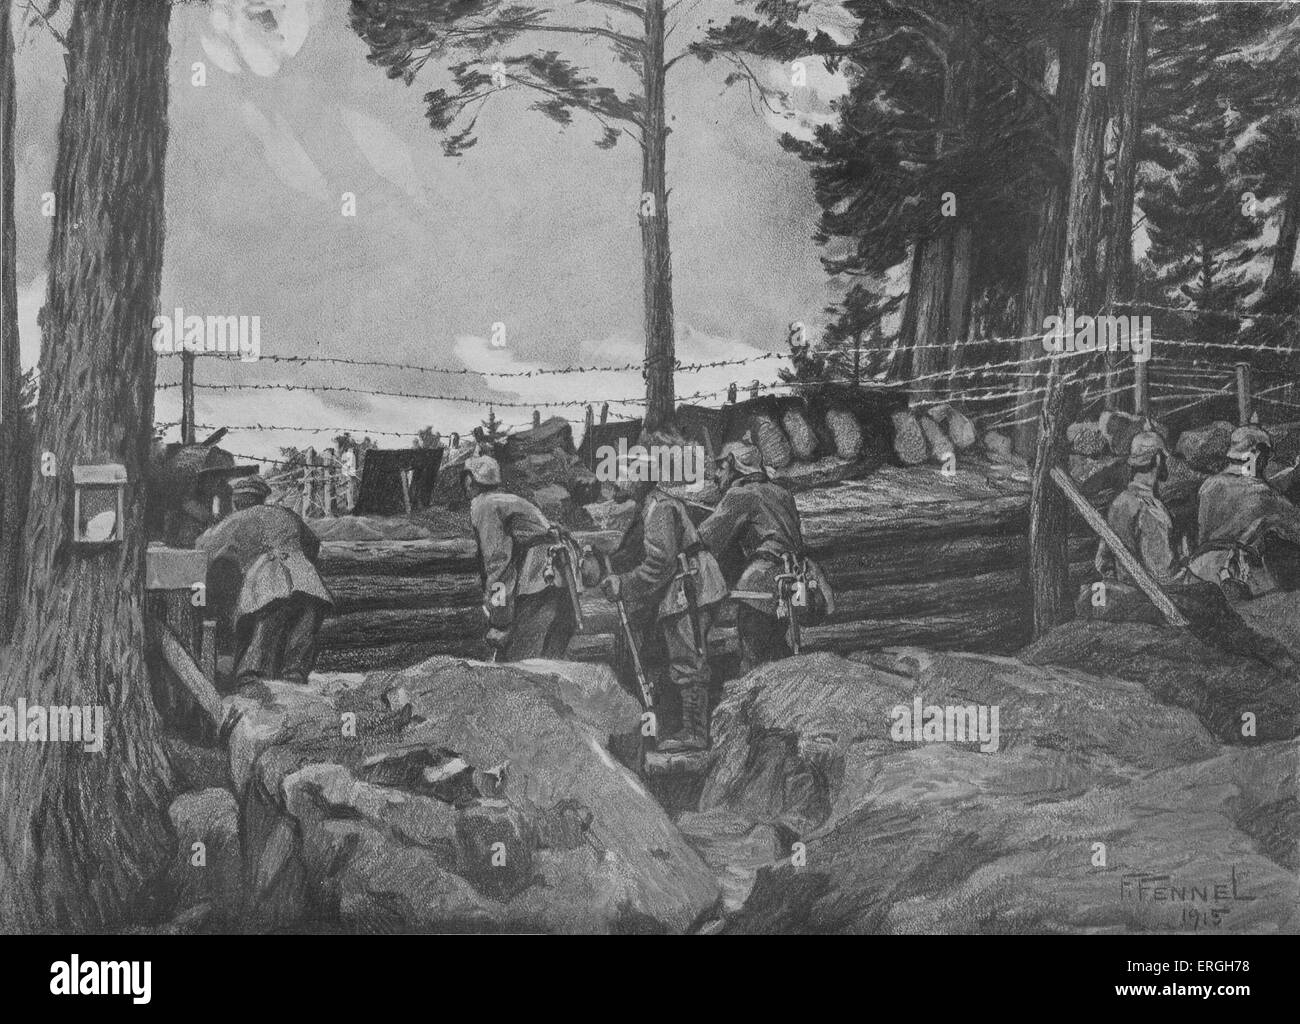 World War 1: German soldiers fighting in the Vosges, at position at Lingekopf and Barrenkopf. Illustration by Friedrich Fennel, published in the Leipzig Illustrirte Zeitung. France. Stock Photo